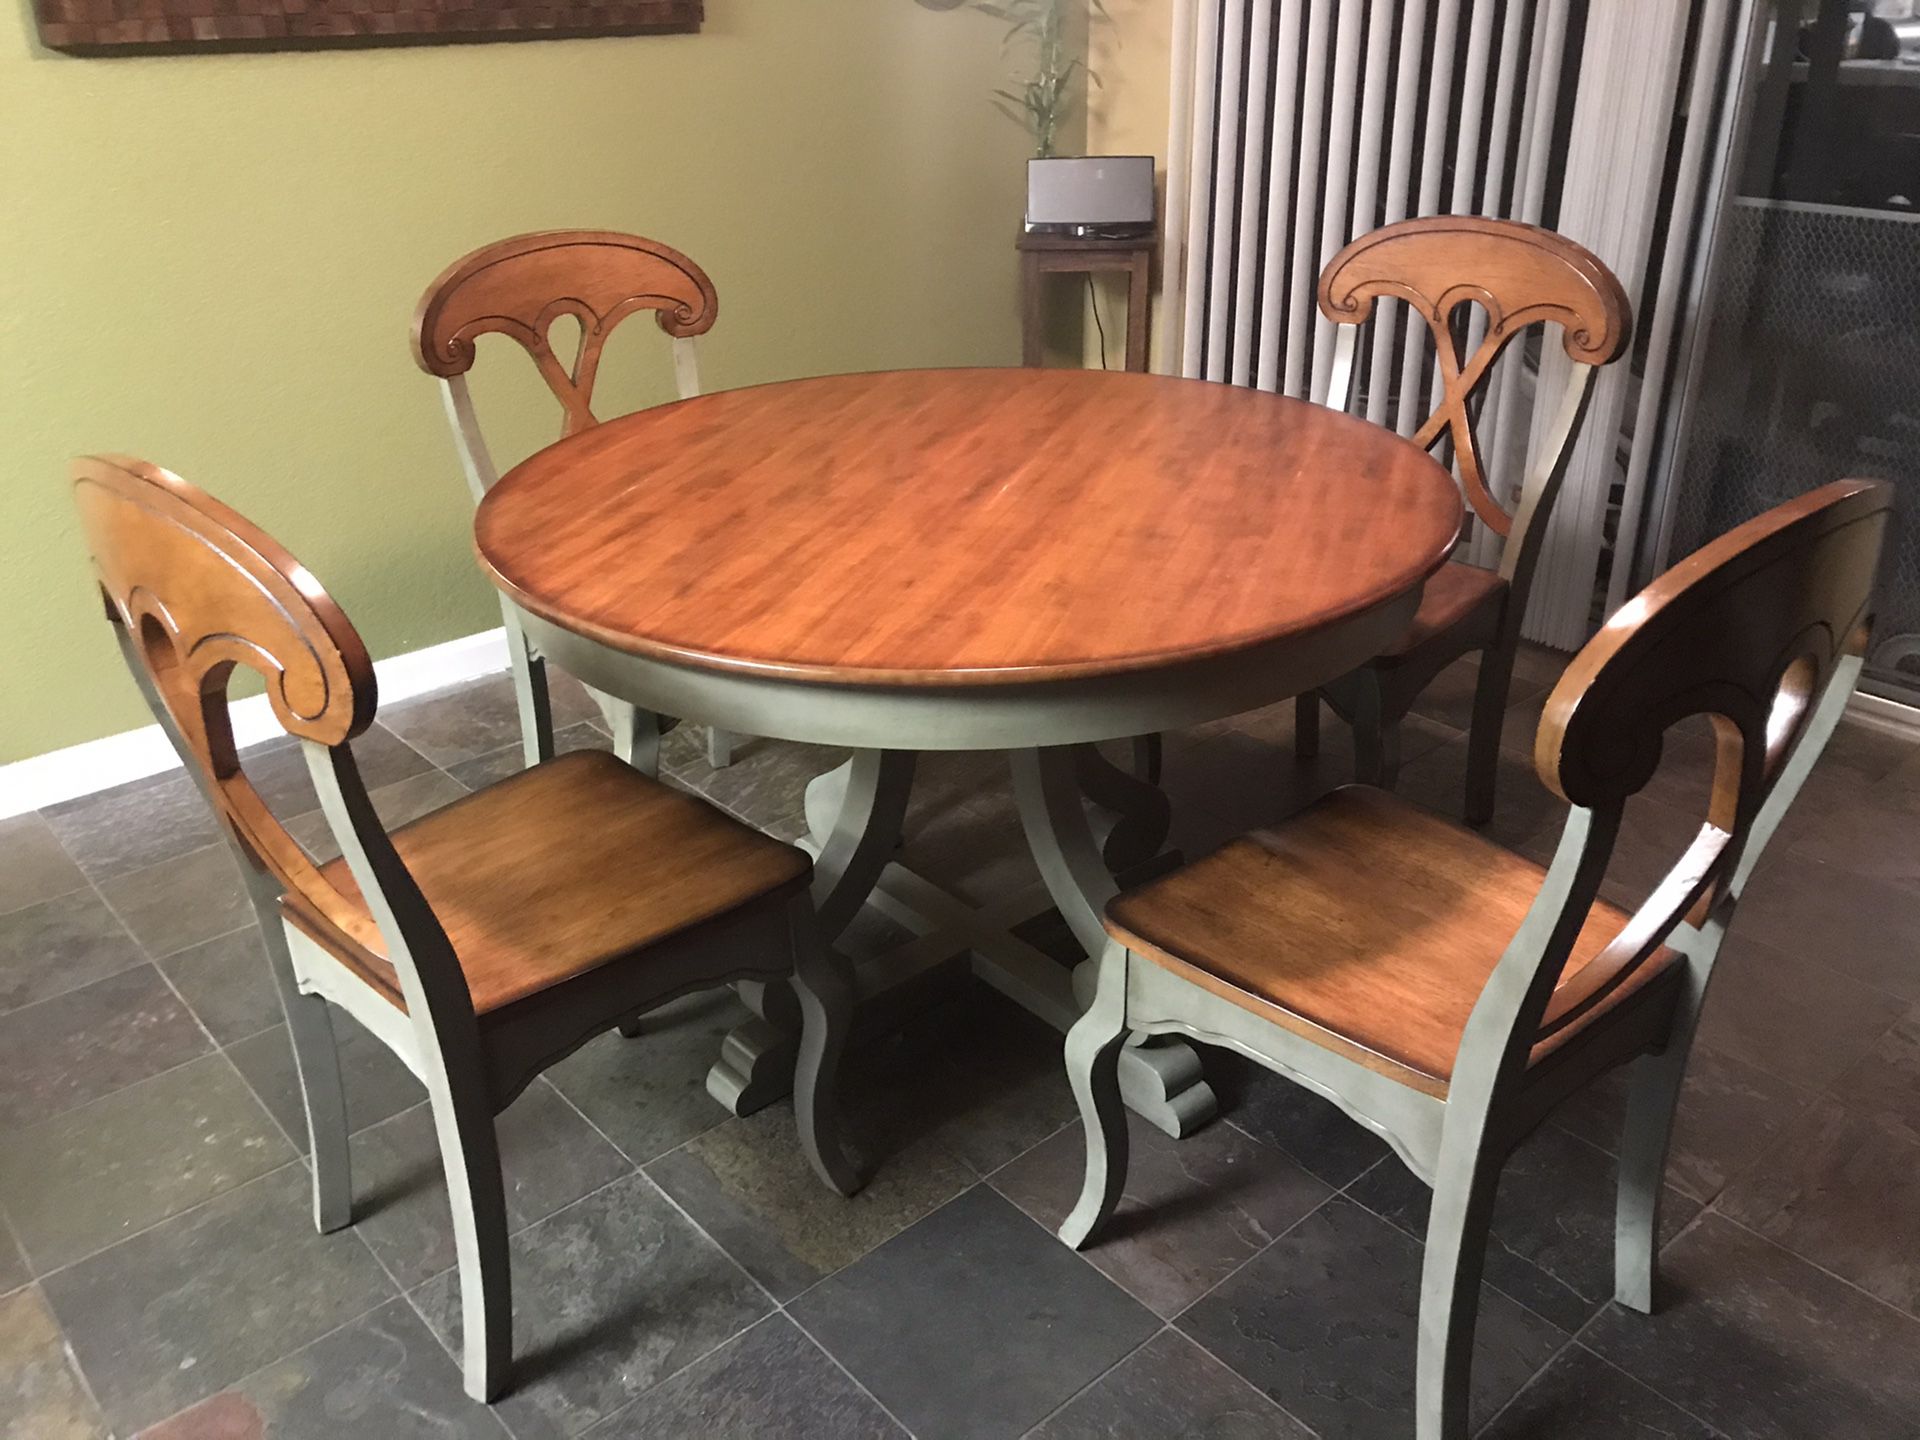 Pier 1 Round Table and 4 chairs